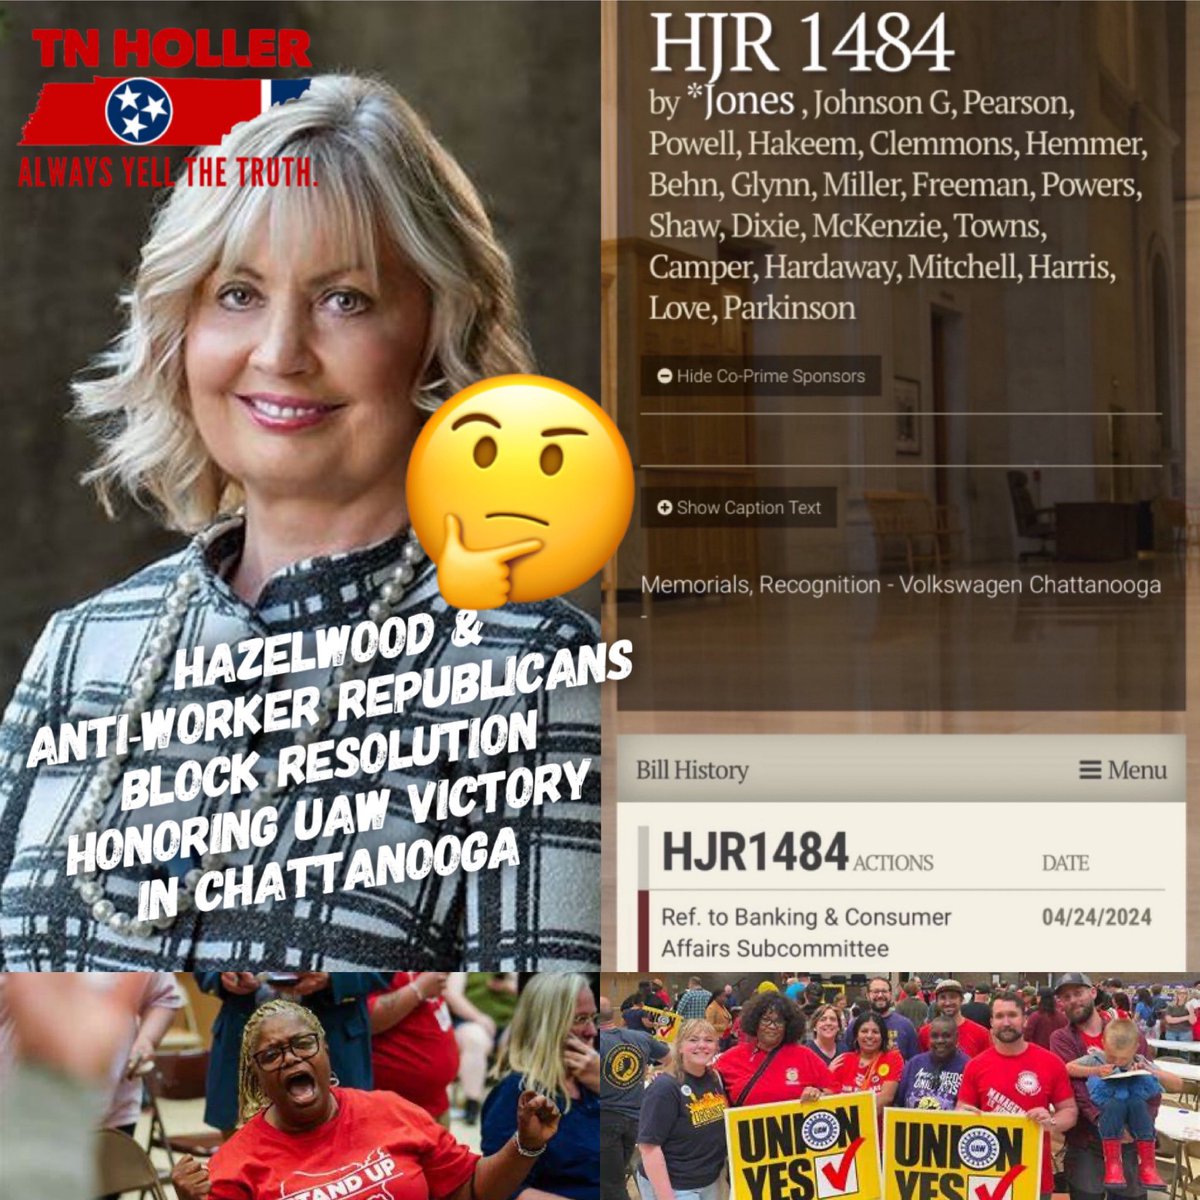 🚧 BLOCKED: @ElectPatsy Hazlewood and the anti-worker @tnhousegop Republicans just blocked and killed a resolution honoring the @UAW victory in CHATTANOOGA, and sent it to a subcommittee (that won’t actually meet)